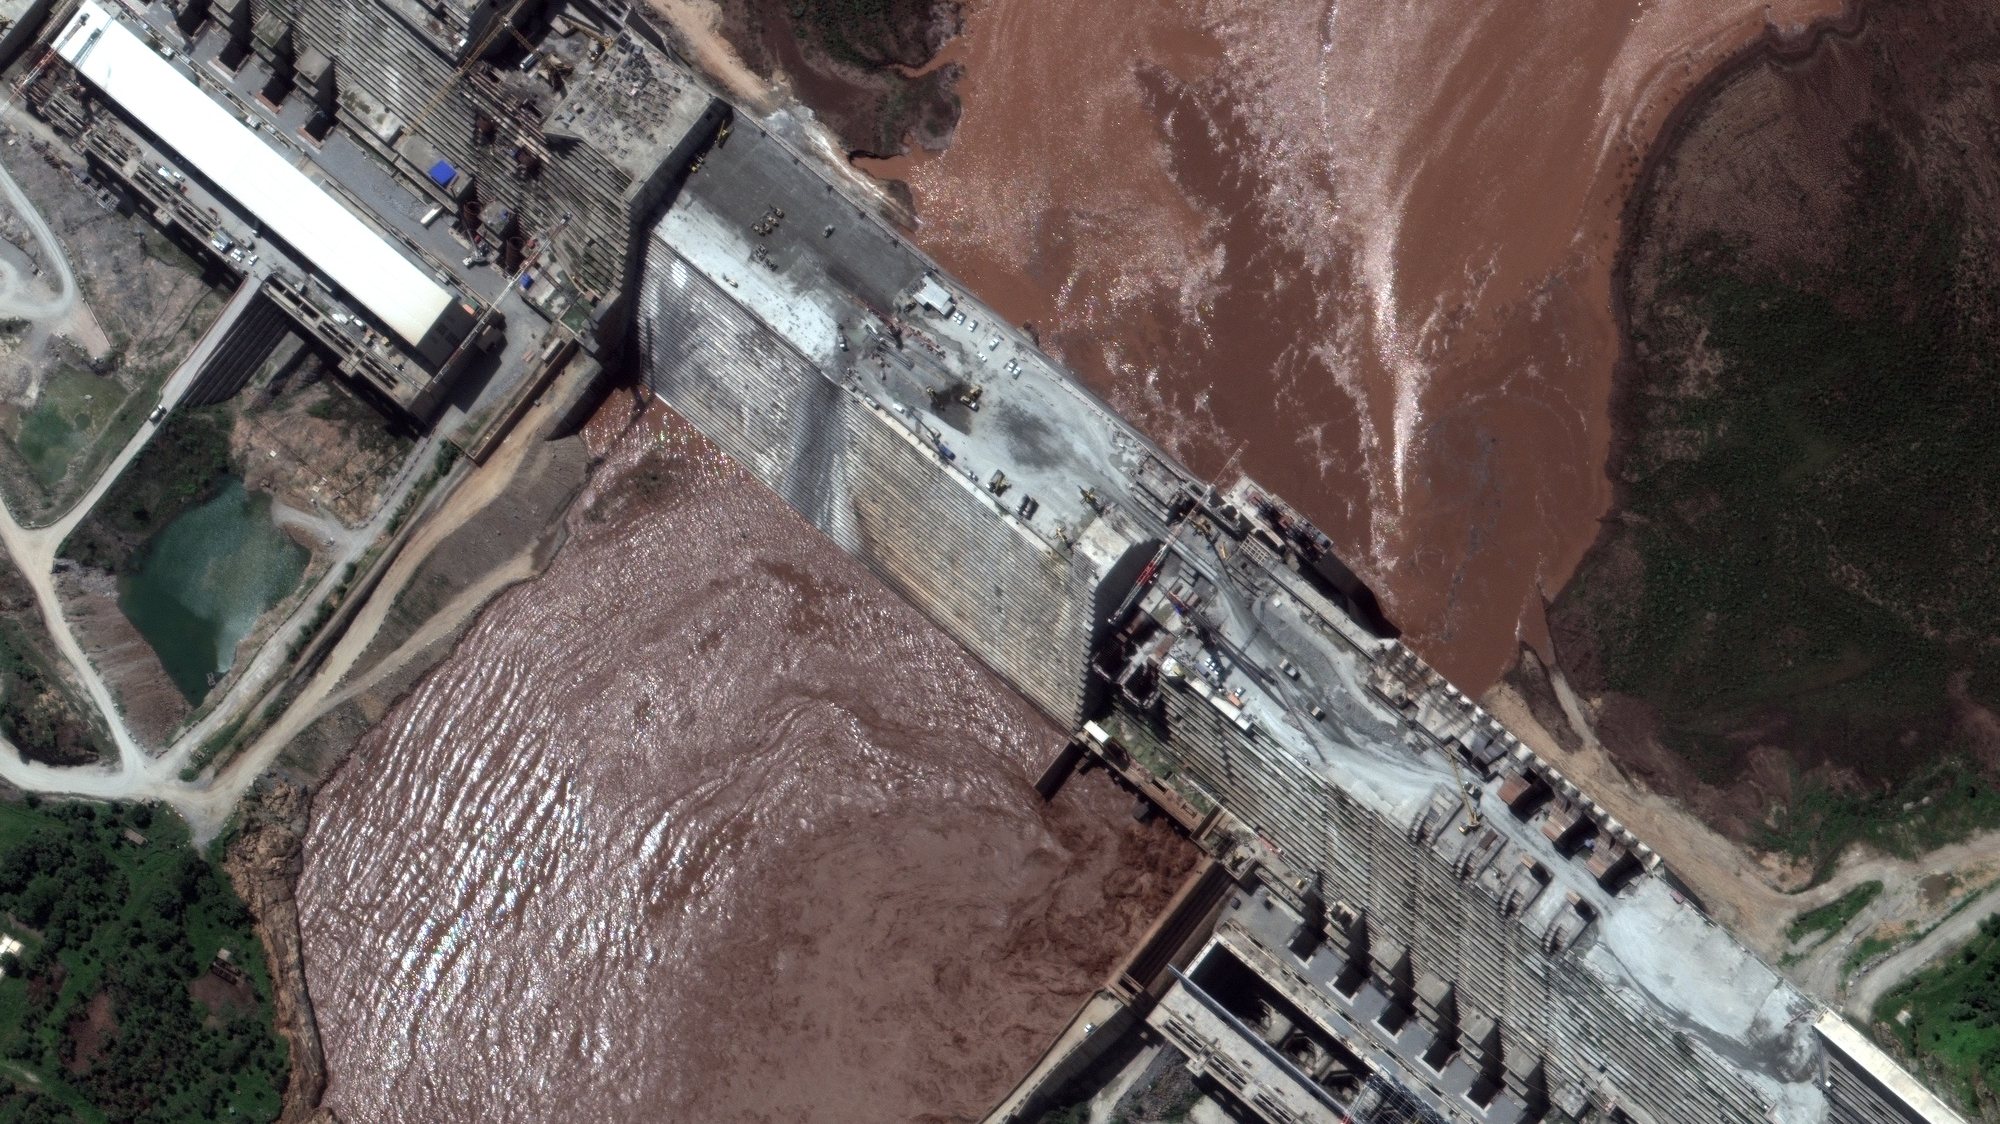 epa08548879 A satellite image made available by MAXAR Technologies shows a close-up view of the Grand Ethiopian Renaissance Dam (GERD) and the Blue Nile River, in the Benishangul-Gumuz region of Ethiopia, 26 June 2020 (issued 16 July 2020). The GERD dam on the Blue Nile River in Ethiopia has been under construction since 2011. The project affects Sudan and Egypt as the Blue Nile river flows north from the dam and is of vital importance to the Nile River. Recent satellite imagery revealed a large reservoir that started to fill behind the dam.  EPA/MAXAR TECHNOLOGIES HANDOUT -- MANDATORY CREDIT: SATELLITE IMAGE 2020 MAXAR TECHNOLOGIES -- the watermark may not be removed/cropped -- HANDOUT EDITORIAL USE ONLY/NO SALES